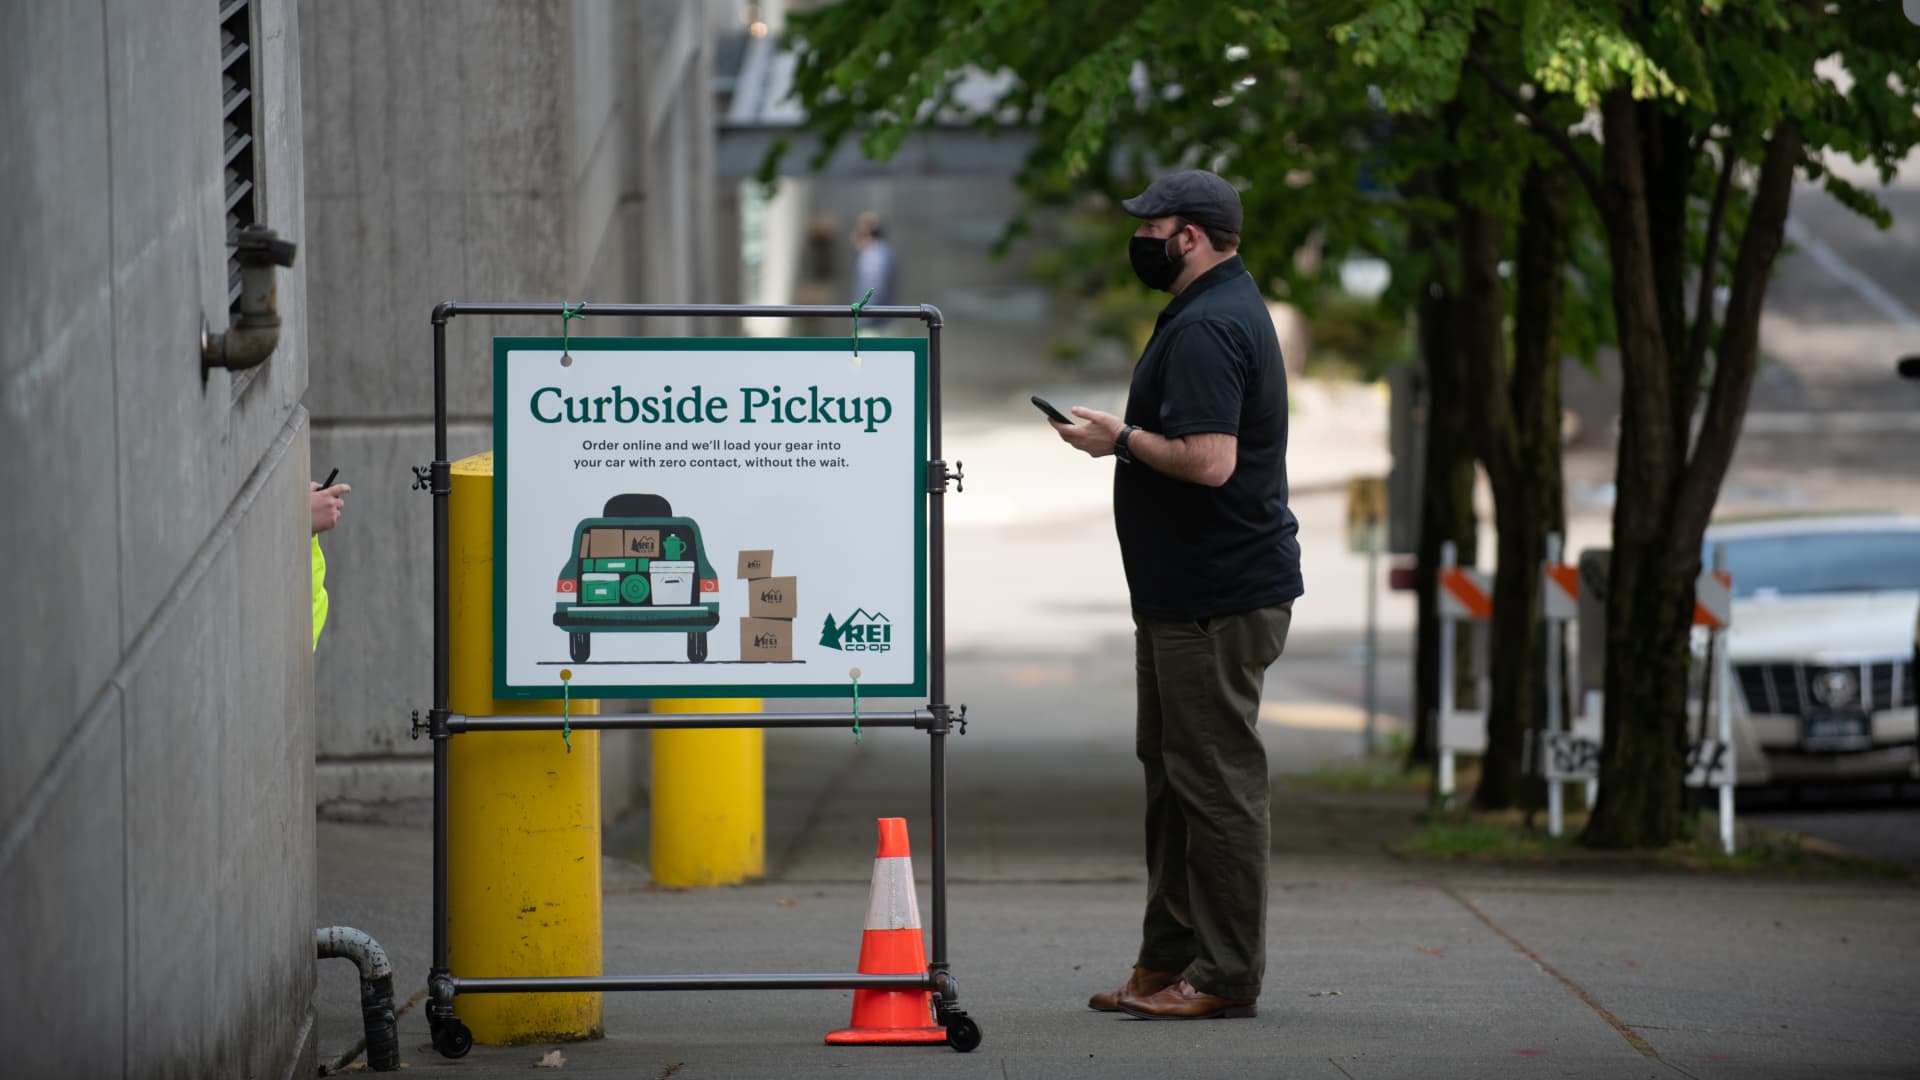 A customer waits for a contactless curbside pickup at the Recreational Equipment Inc. (REI) flagship store in Seattle, Washington, U.S., on Thursday, May 14, 2020.